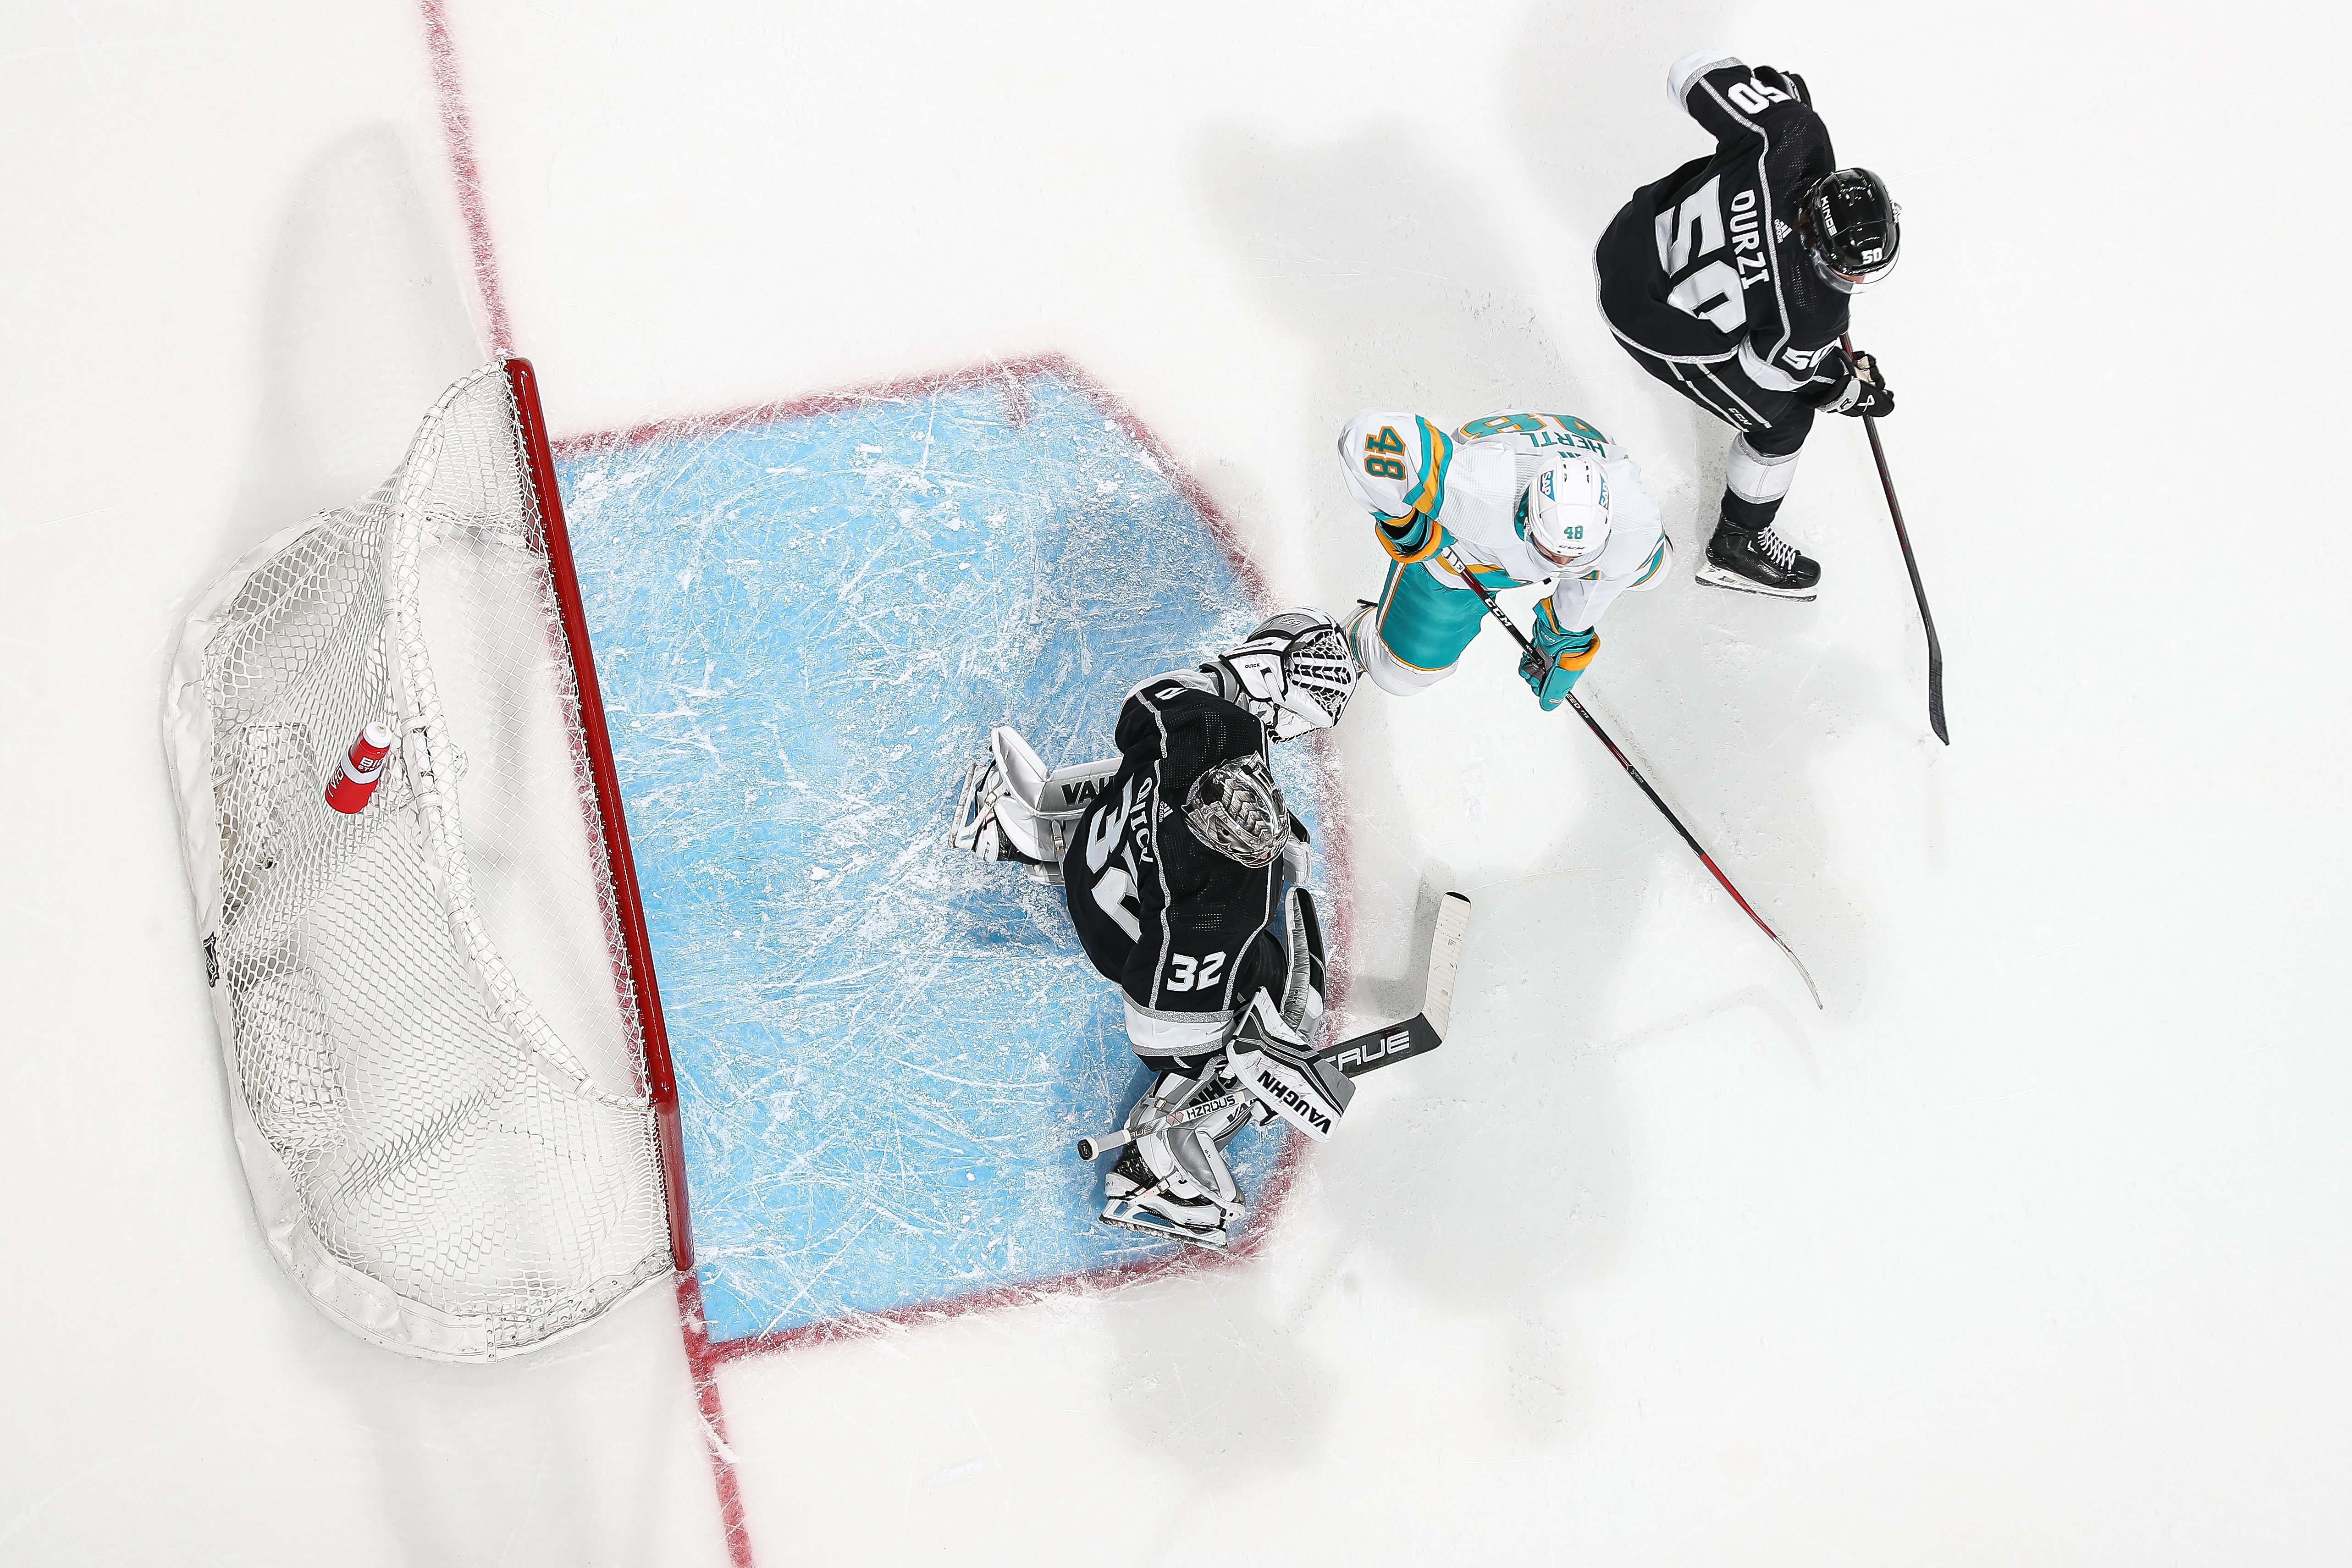 An overhead view as Jonathan Quick #32 of the Los Angeles Kings makes a save against Tomas Hertl #48 of the San Jose Sharks at SAP Center on November 25, 2022 in San Jose, California.